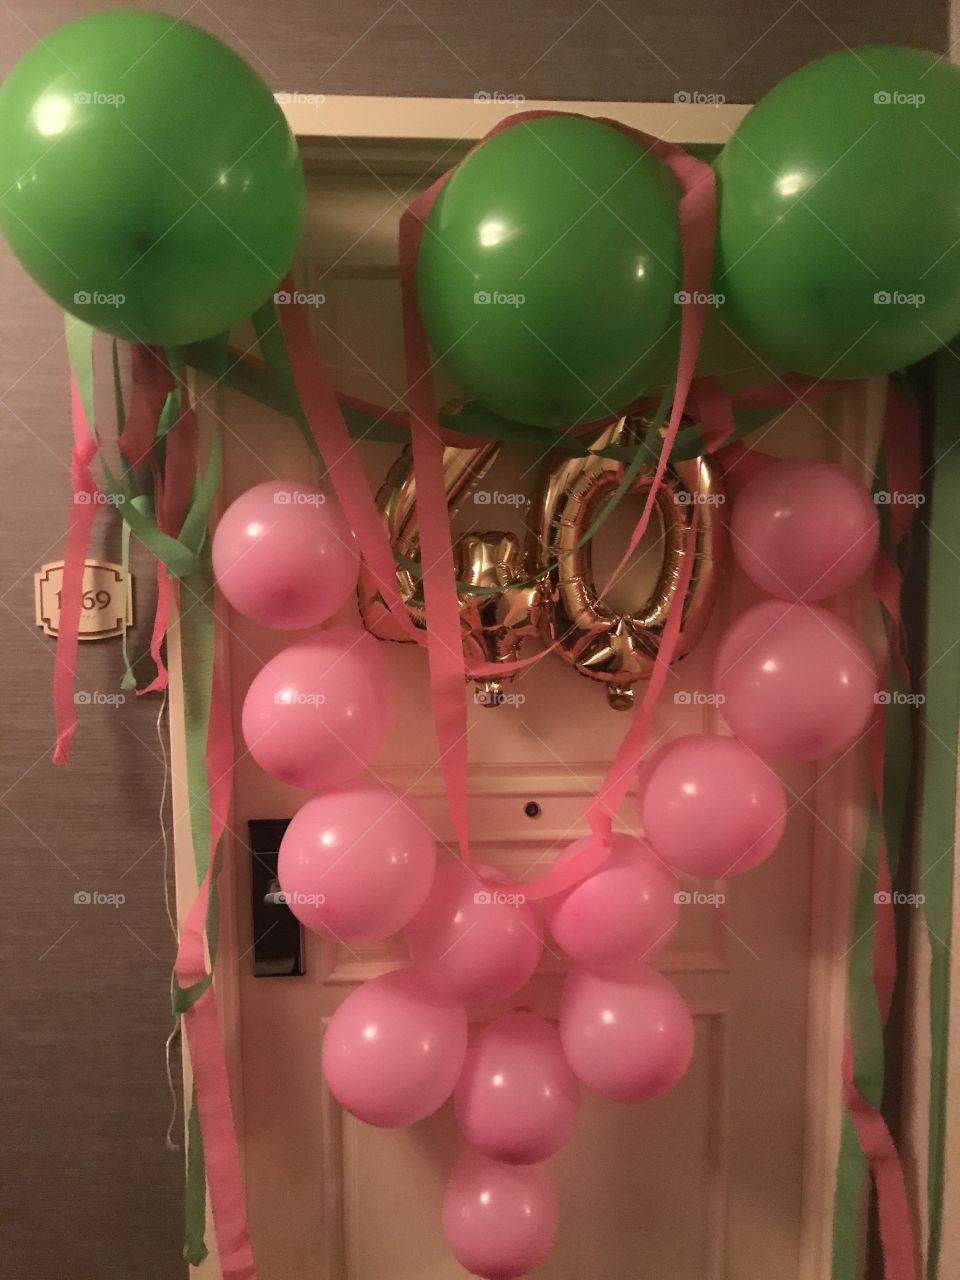 No Person, Decoration, Round Out, Hanging, Balloon